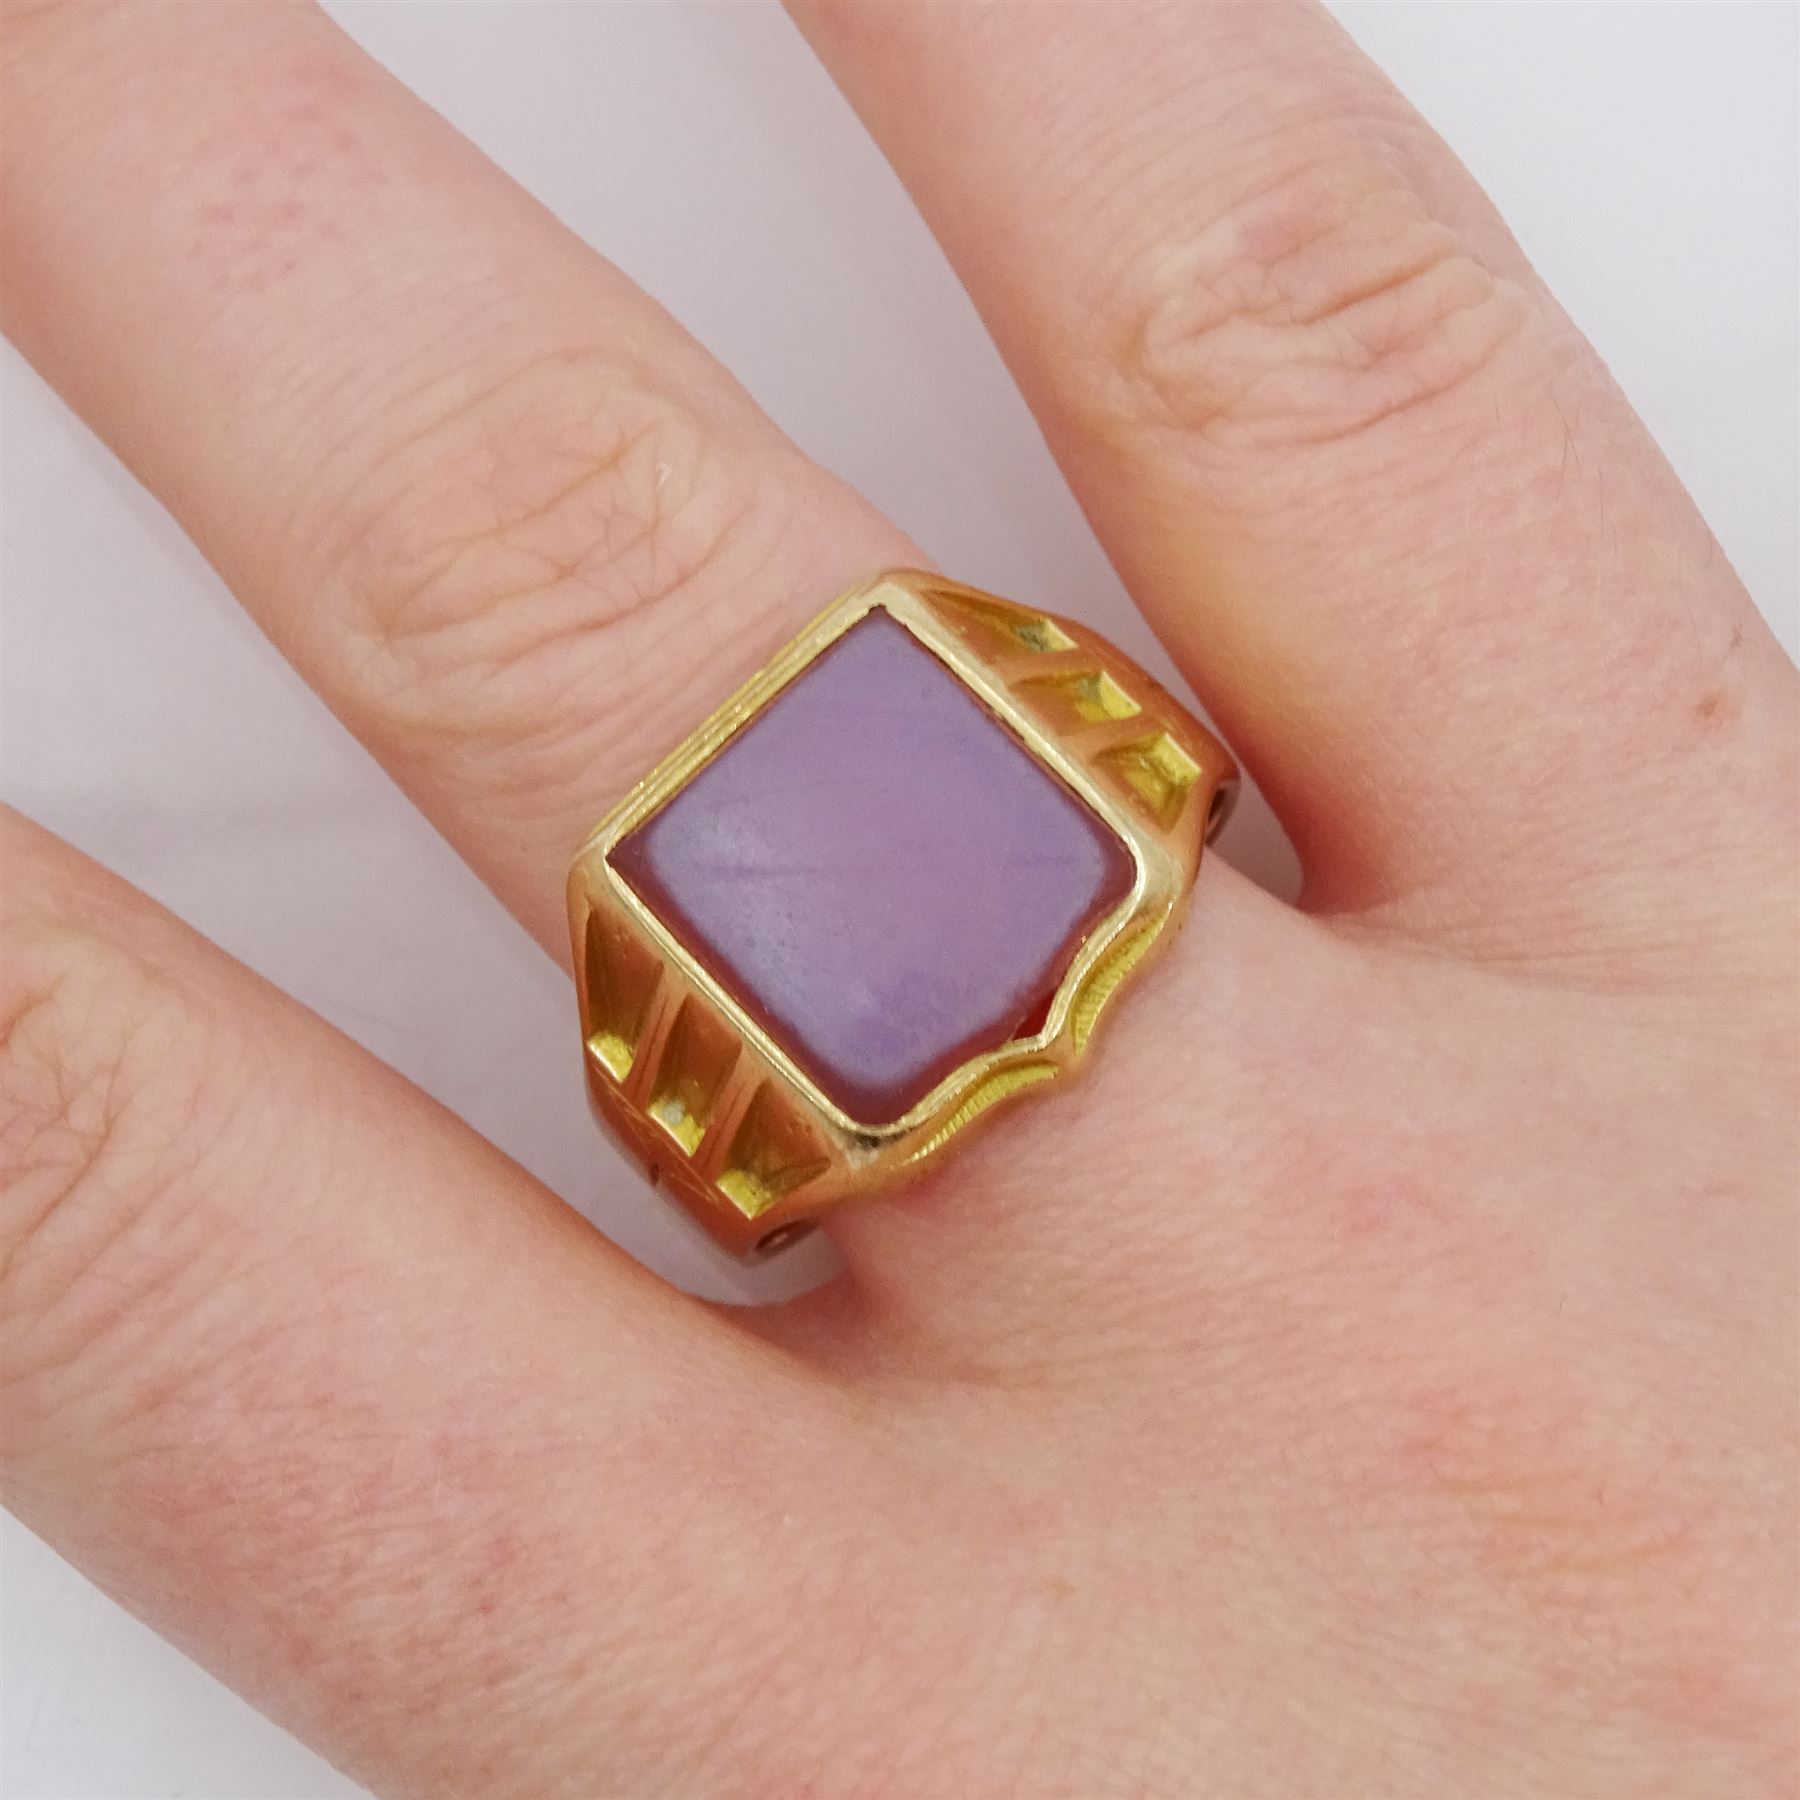 Early 20th century 15ct gold agate shield signet ring - Image 2 of 4